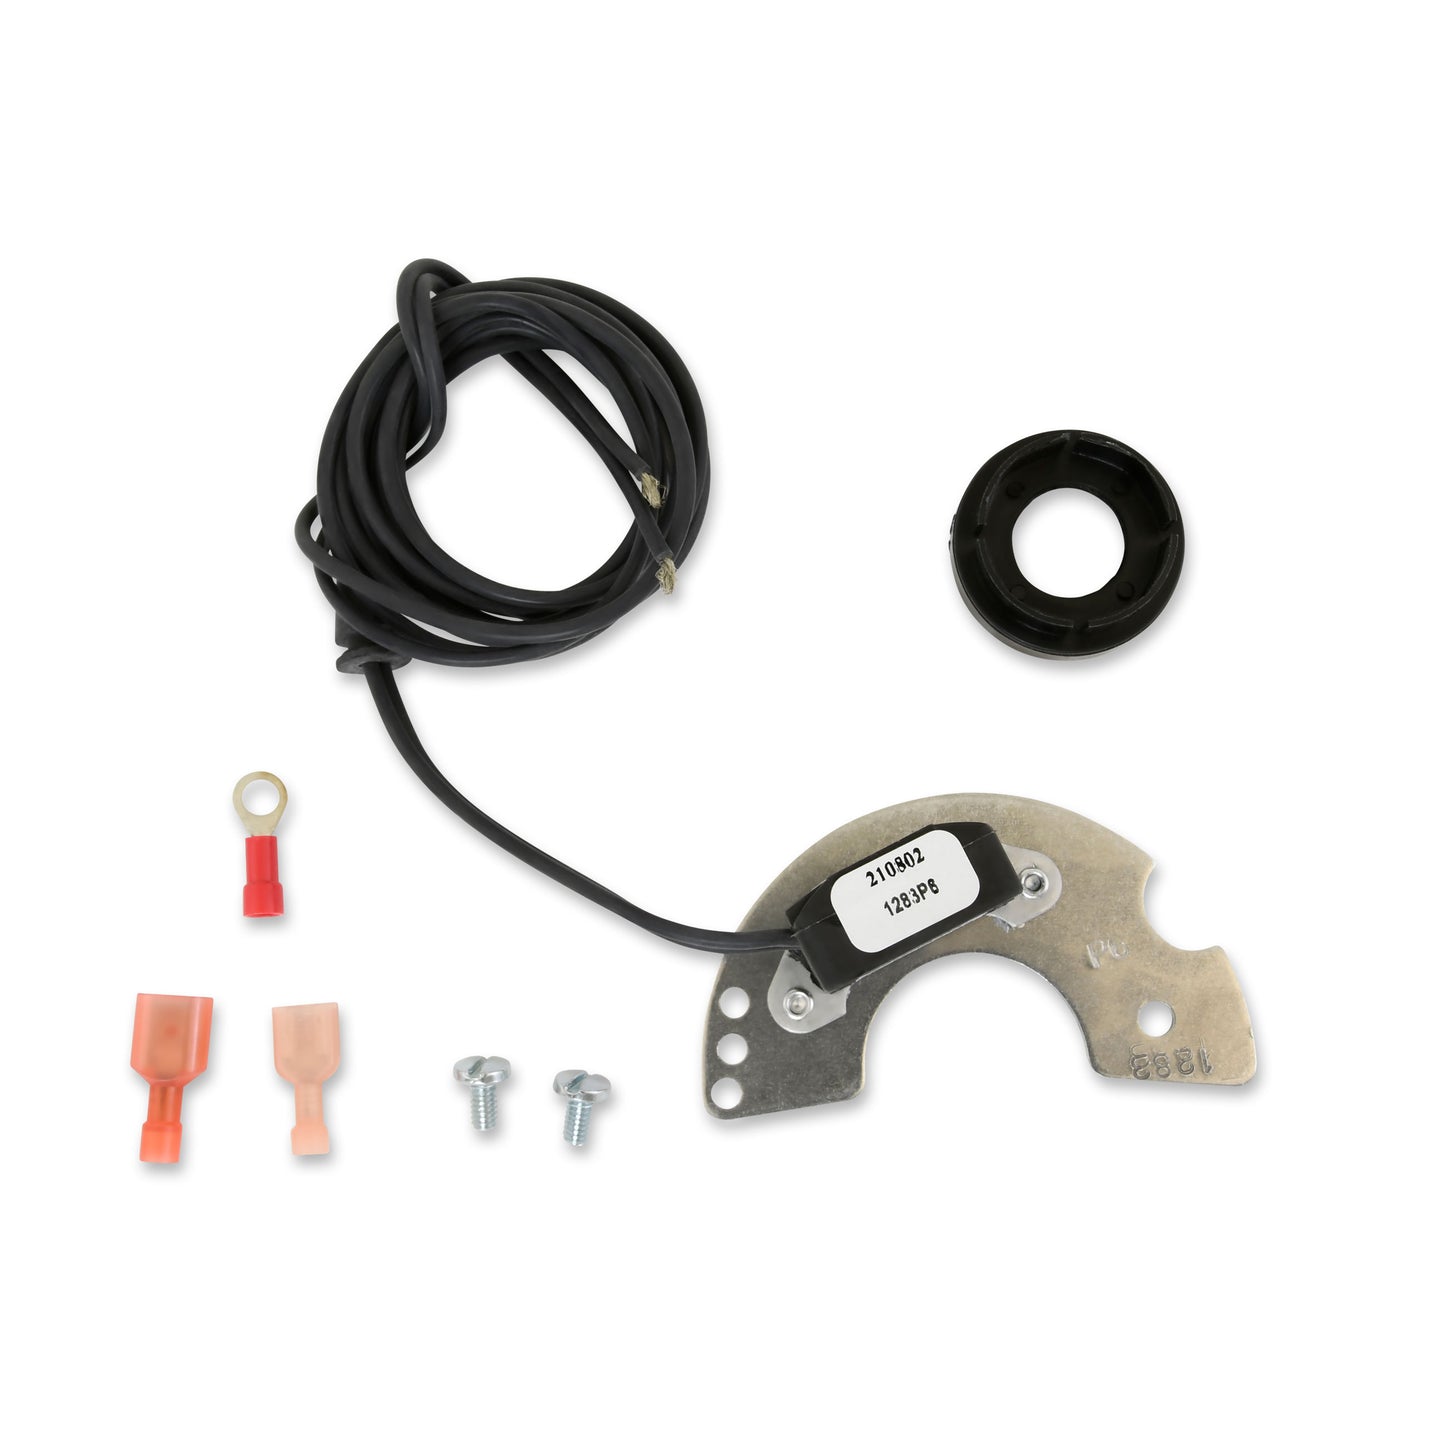 PerTronix Ignitor Electronic Ignition Conversion Kit-1283P6